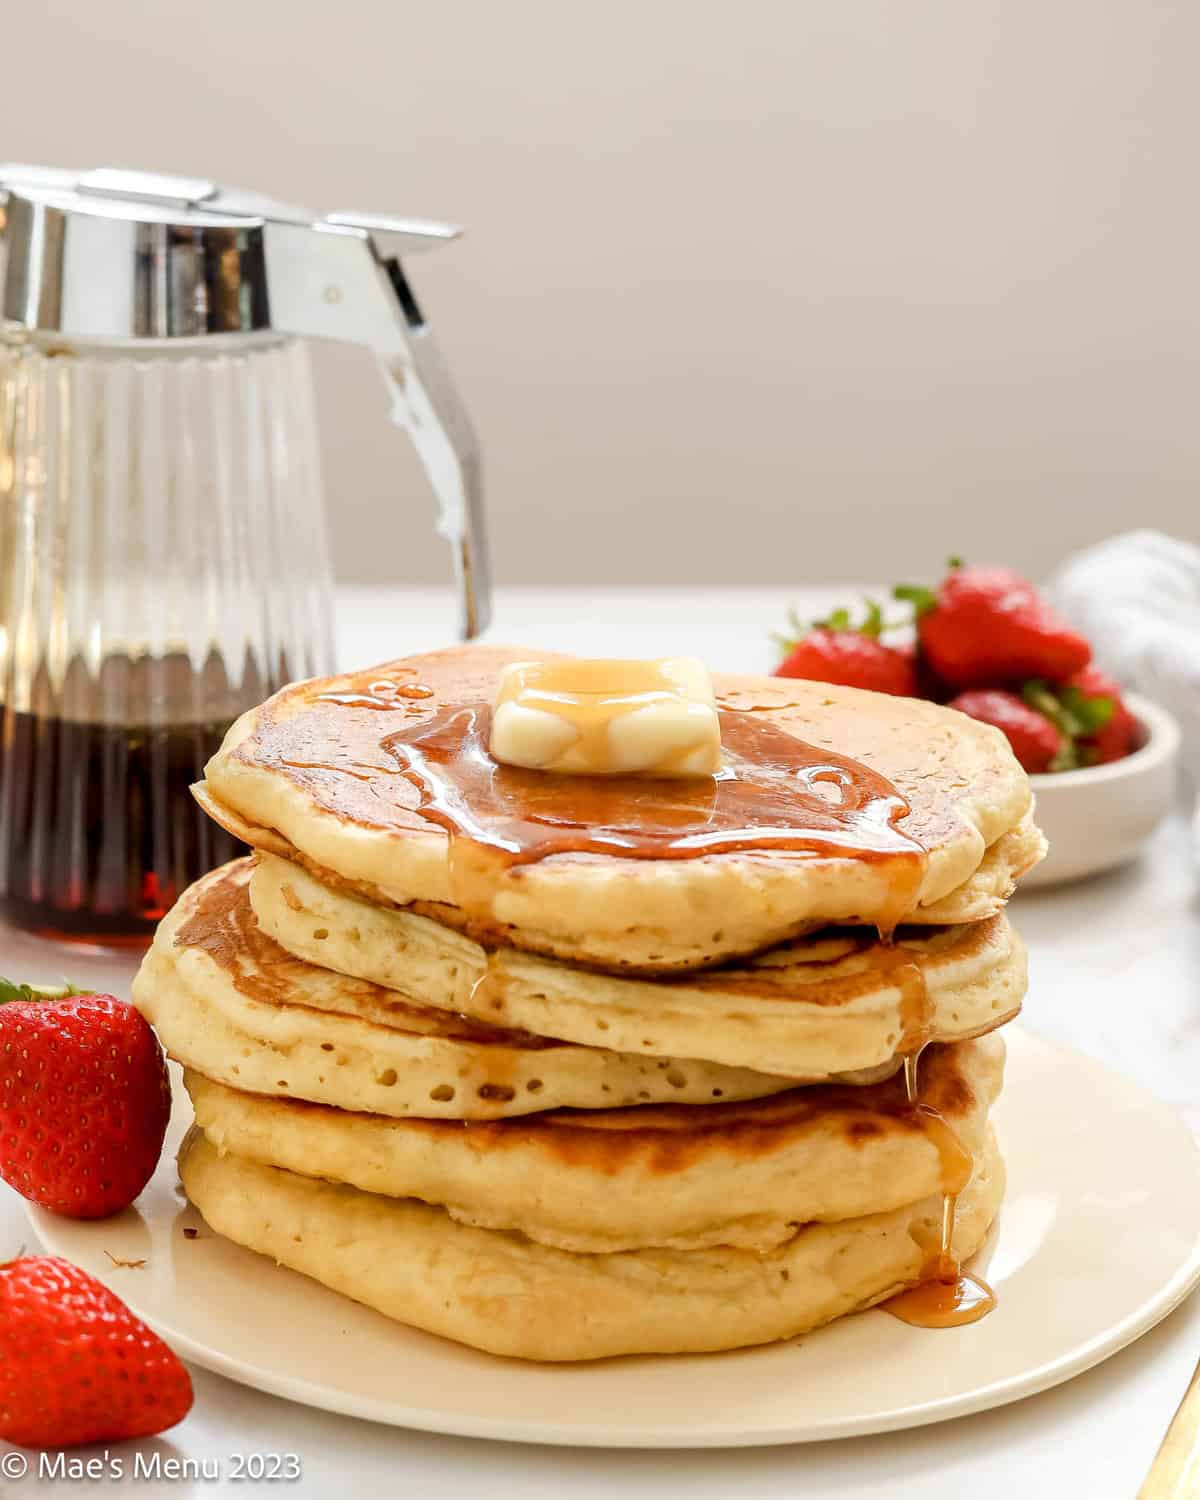 A stack of fluffy buttermilk pancakes drizzled with maple syrup.